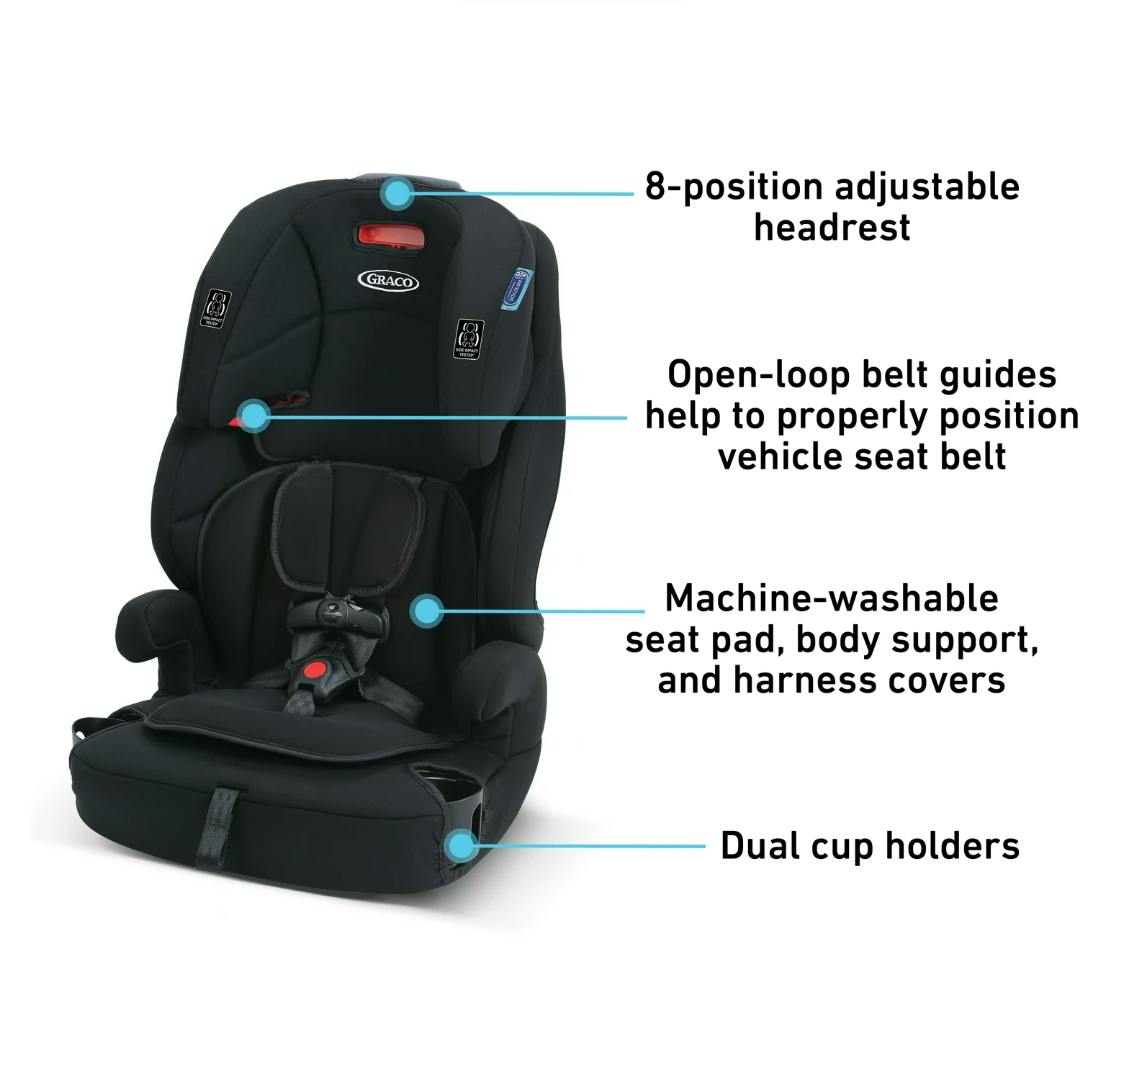 Graco Tranzitions™ 3-in-1 Harness Booster · Proof